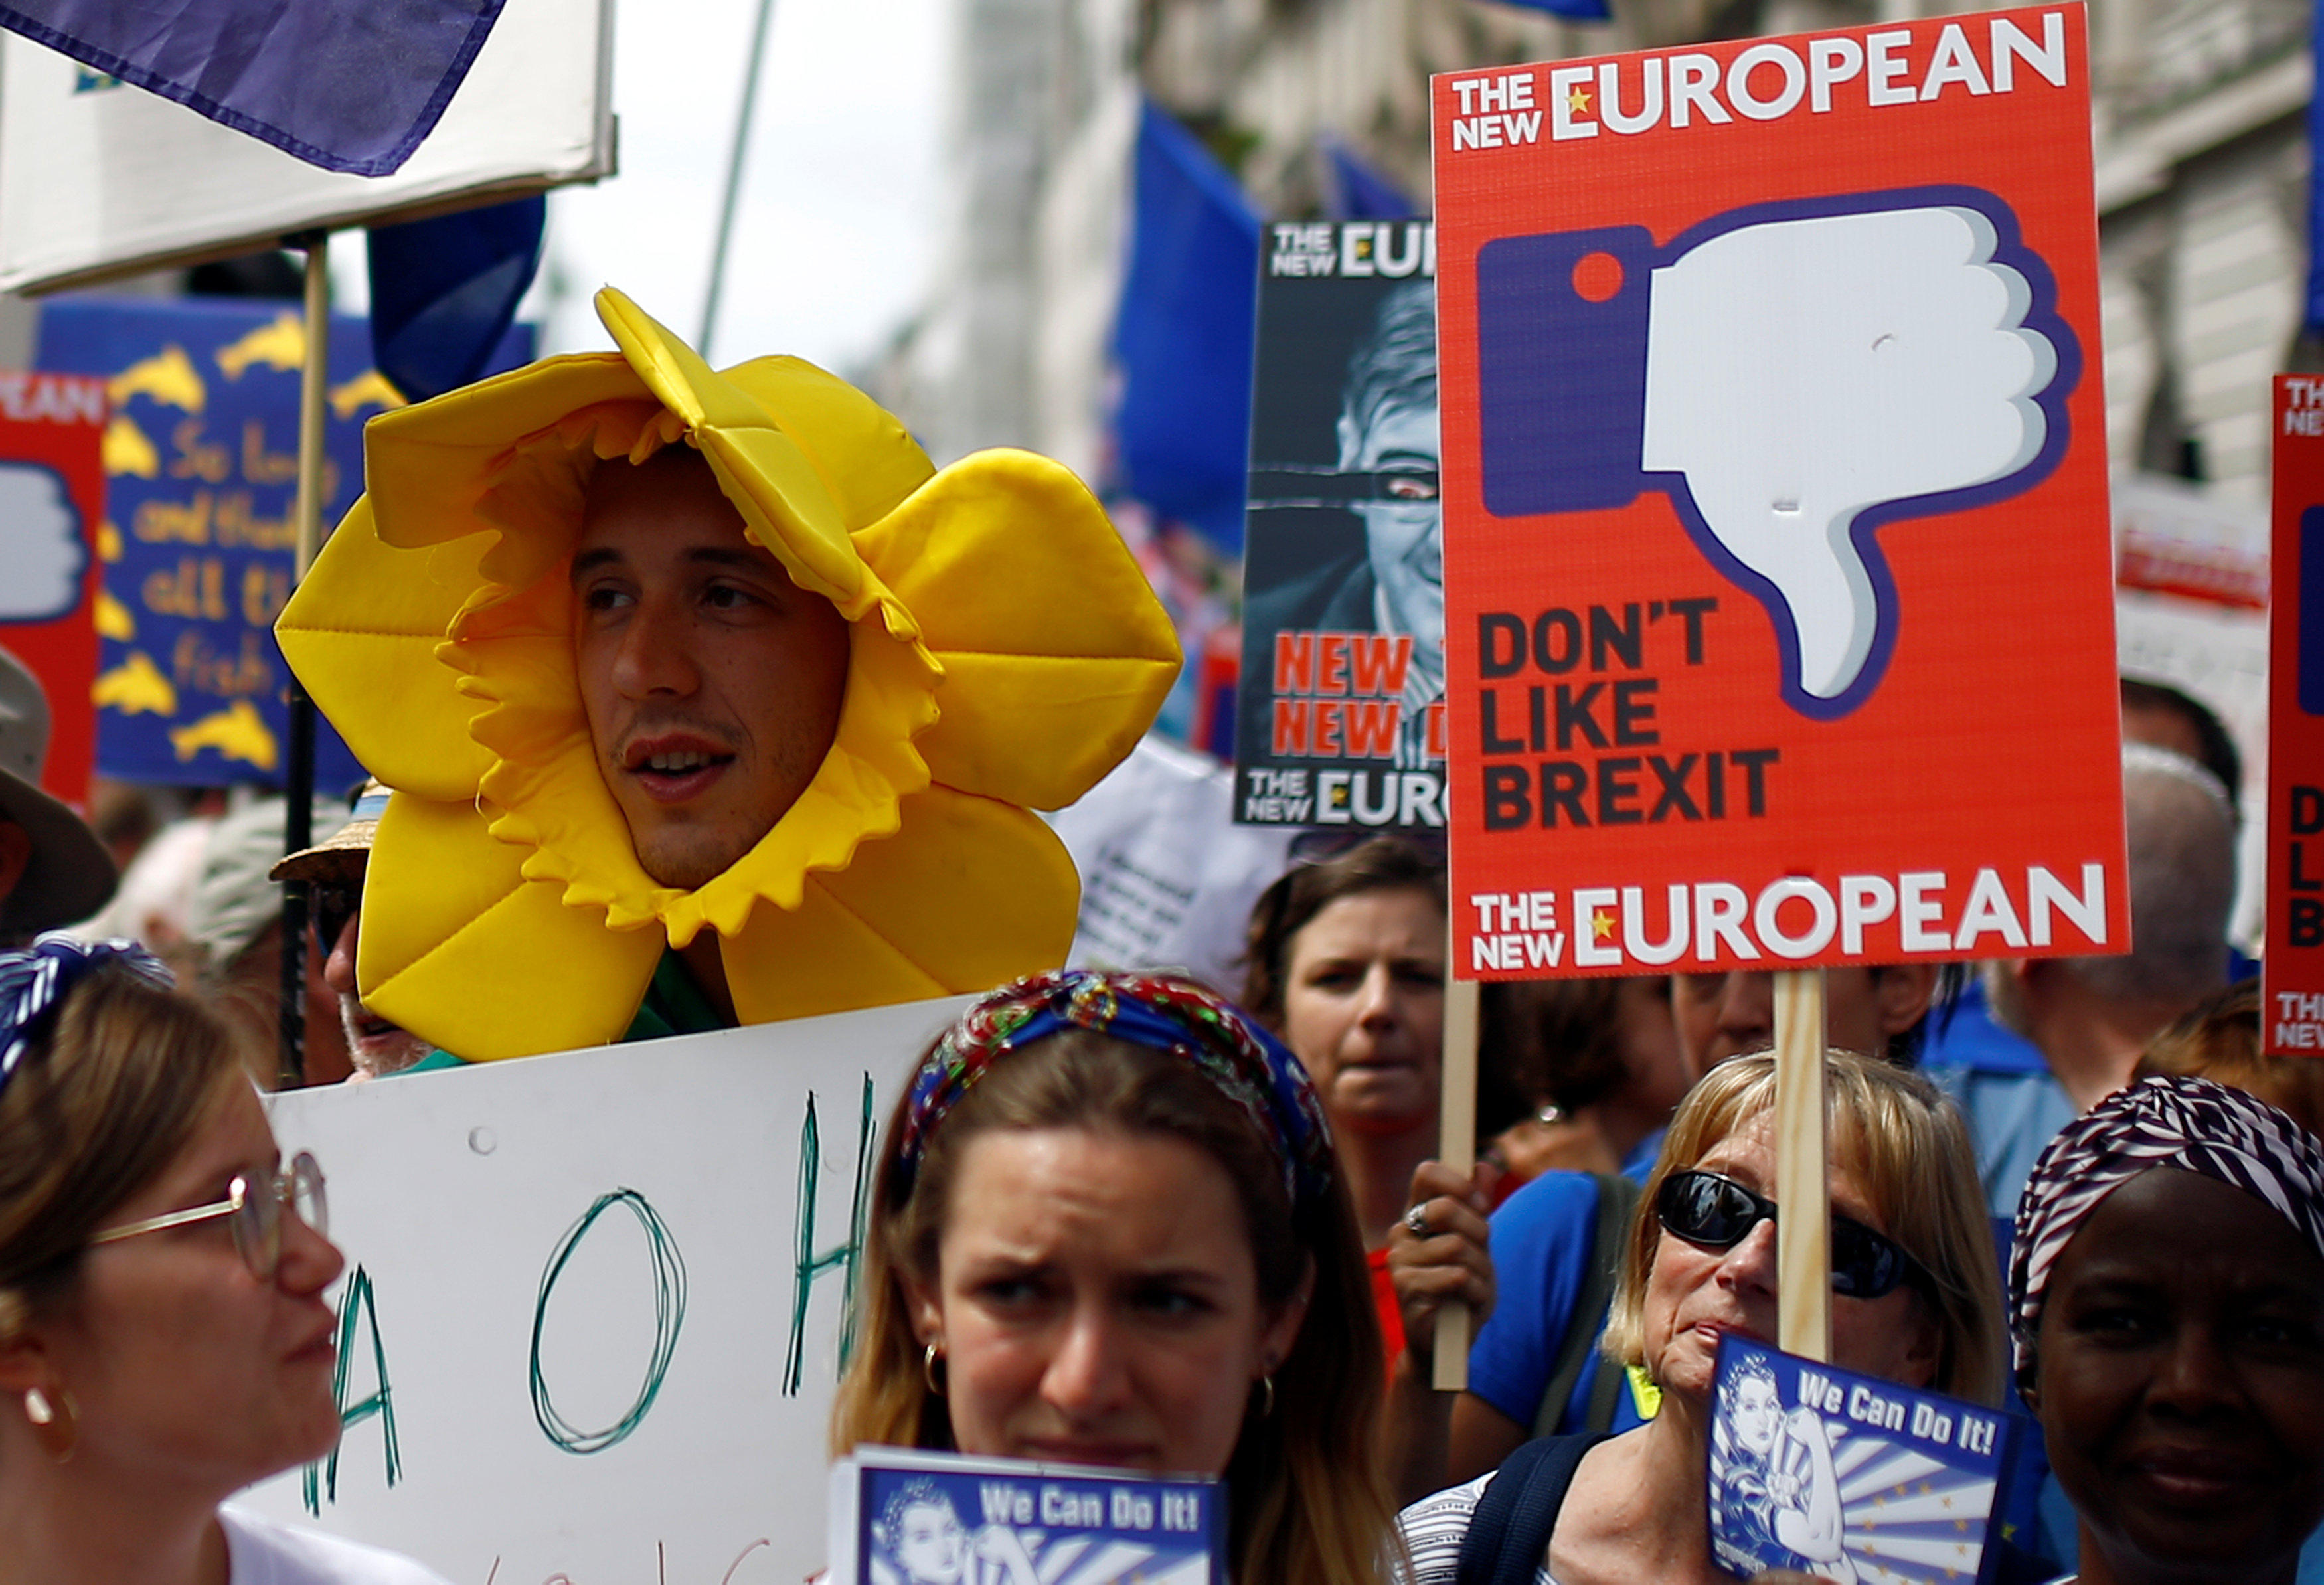 Tens of thousands anti-Brexit protesters march in London, demand new vote - CBS News